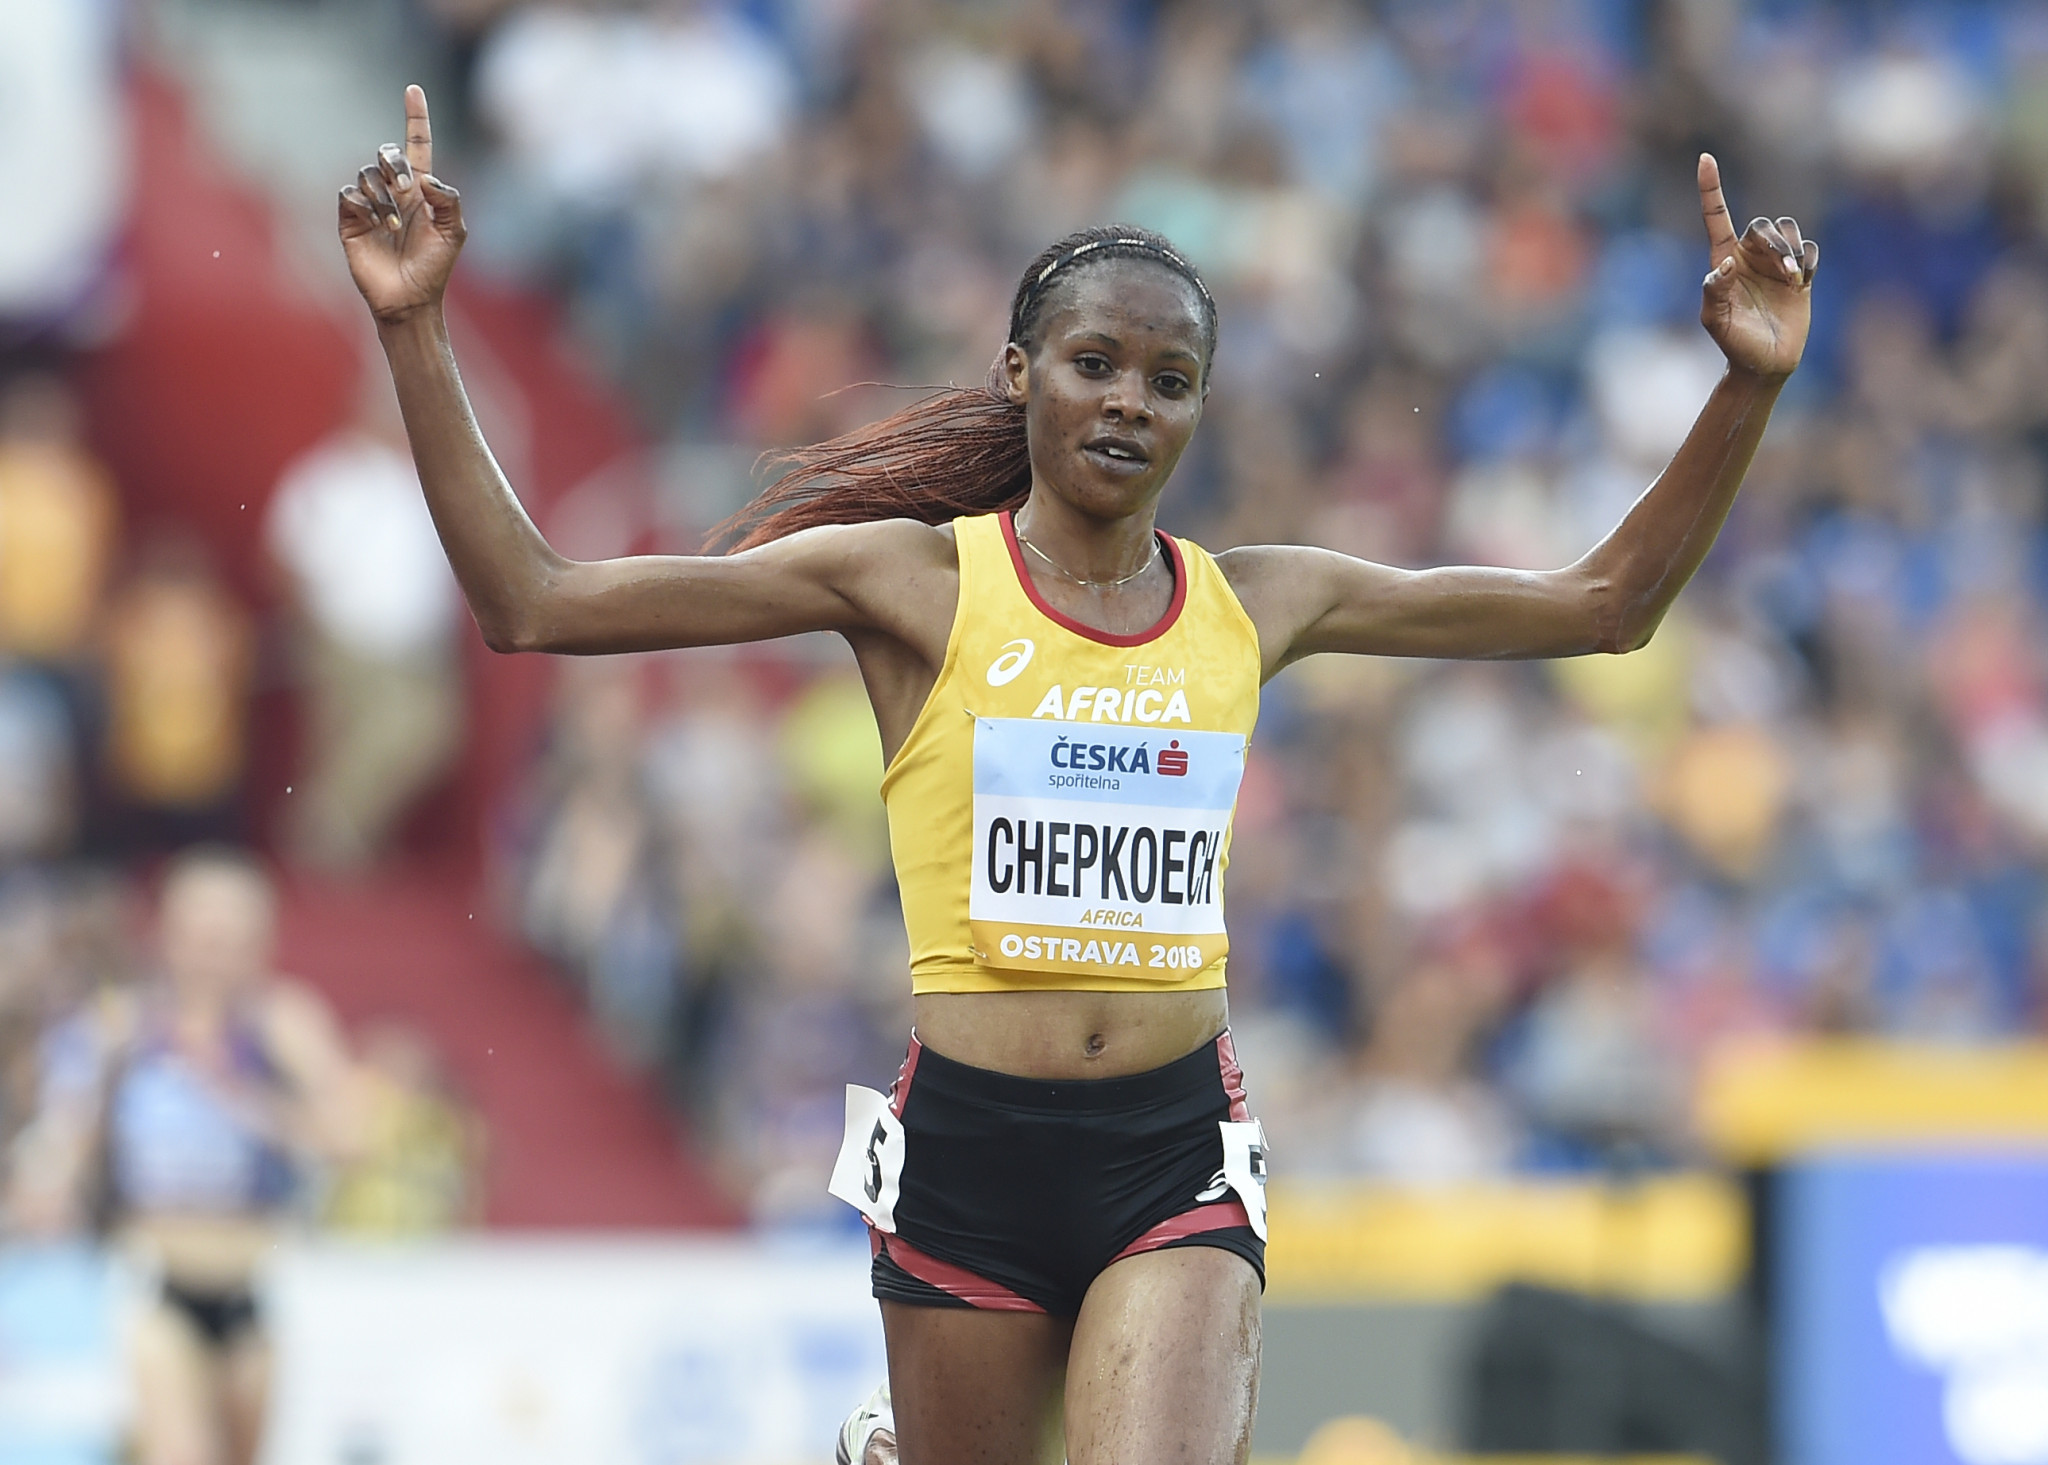 Kenya's Beatrice Chepkoech has been announced as a finalist for the Female World Athlete of the Year award by the IAAF for a season which included setting a world record in the 3,000m steeplechase ©Getty Images